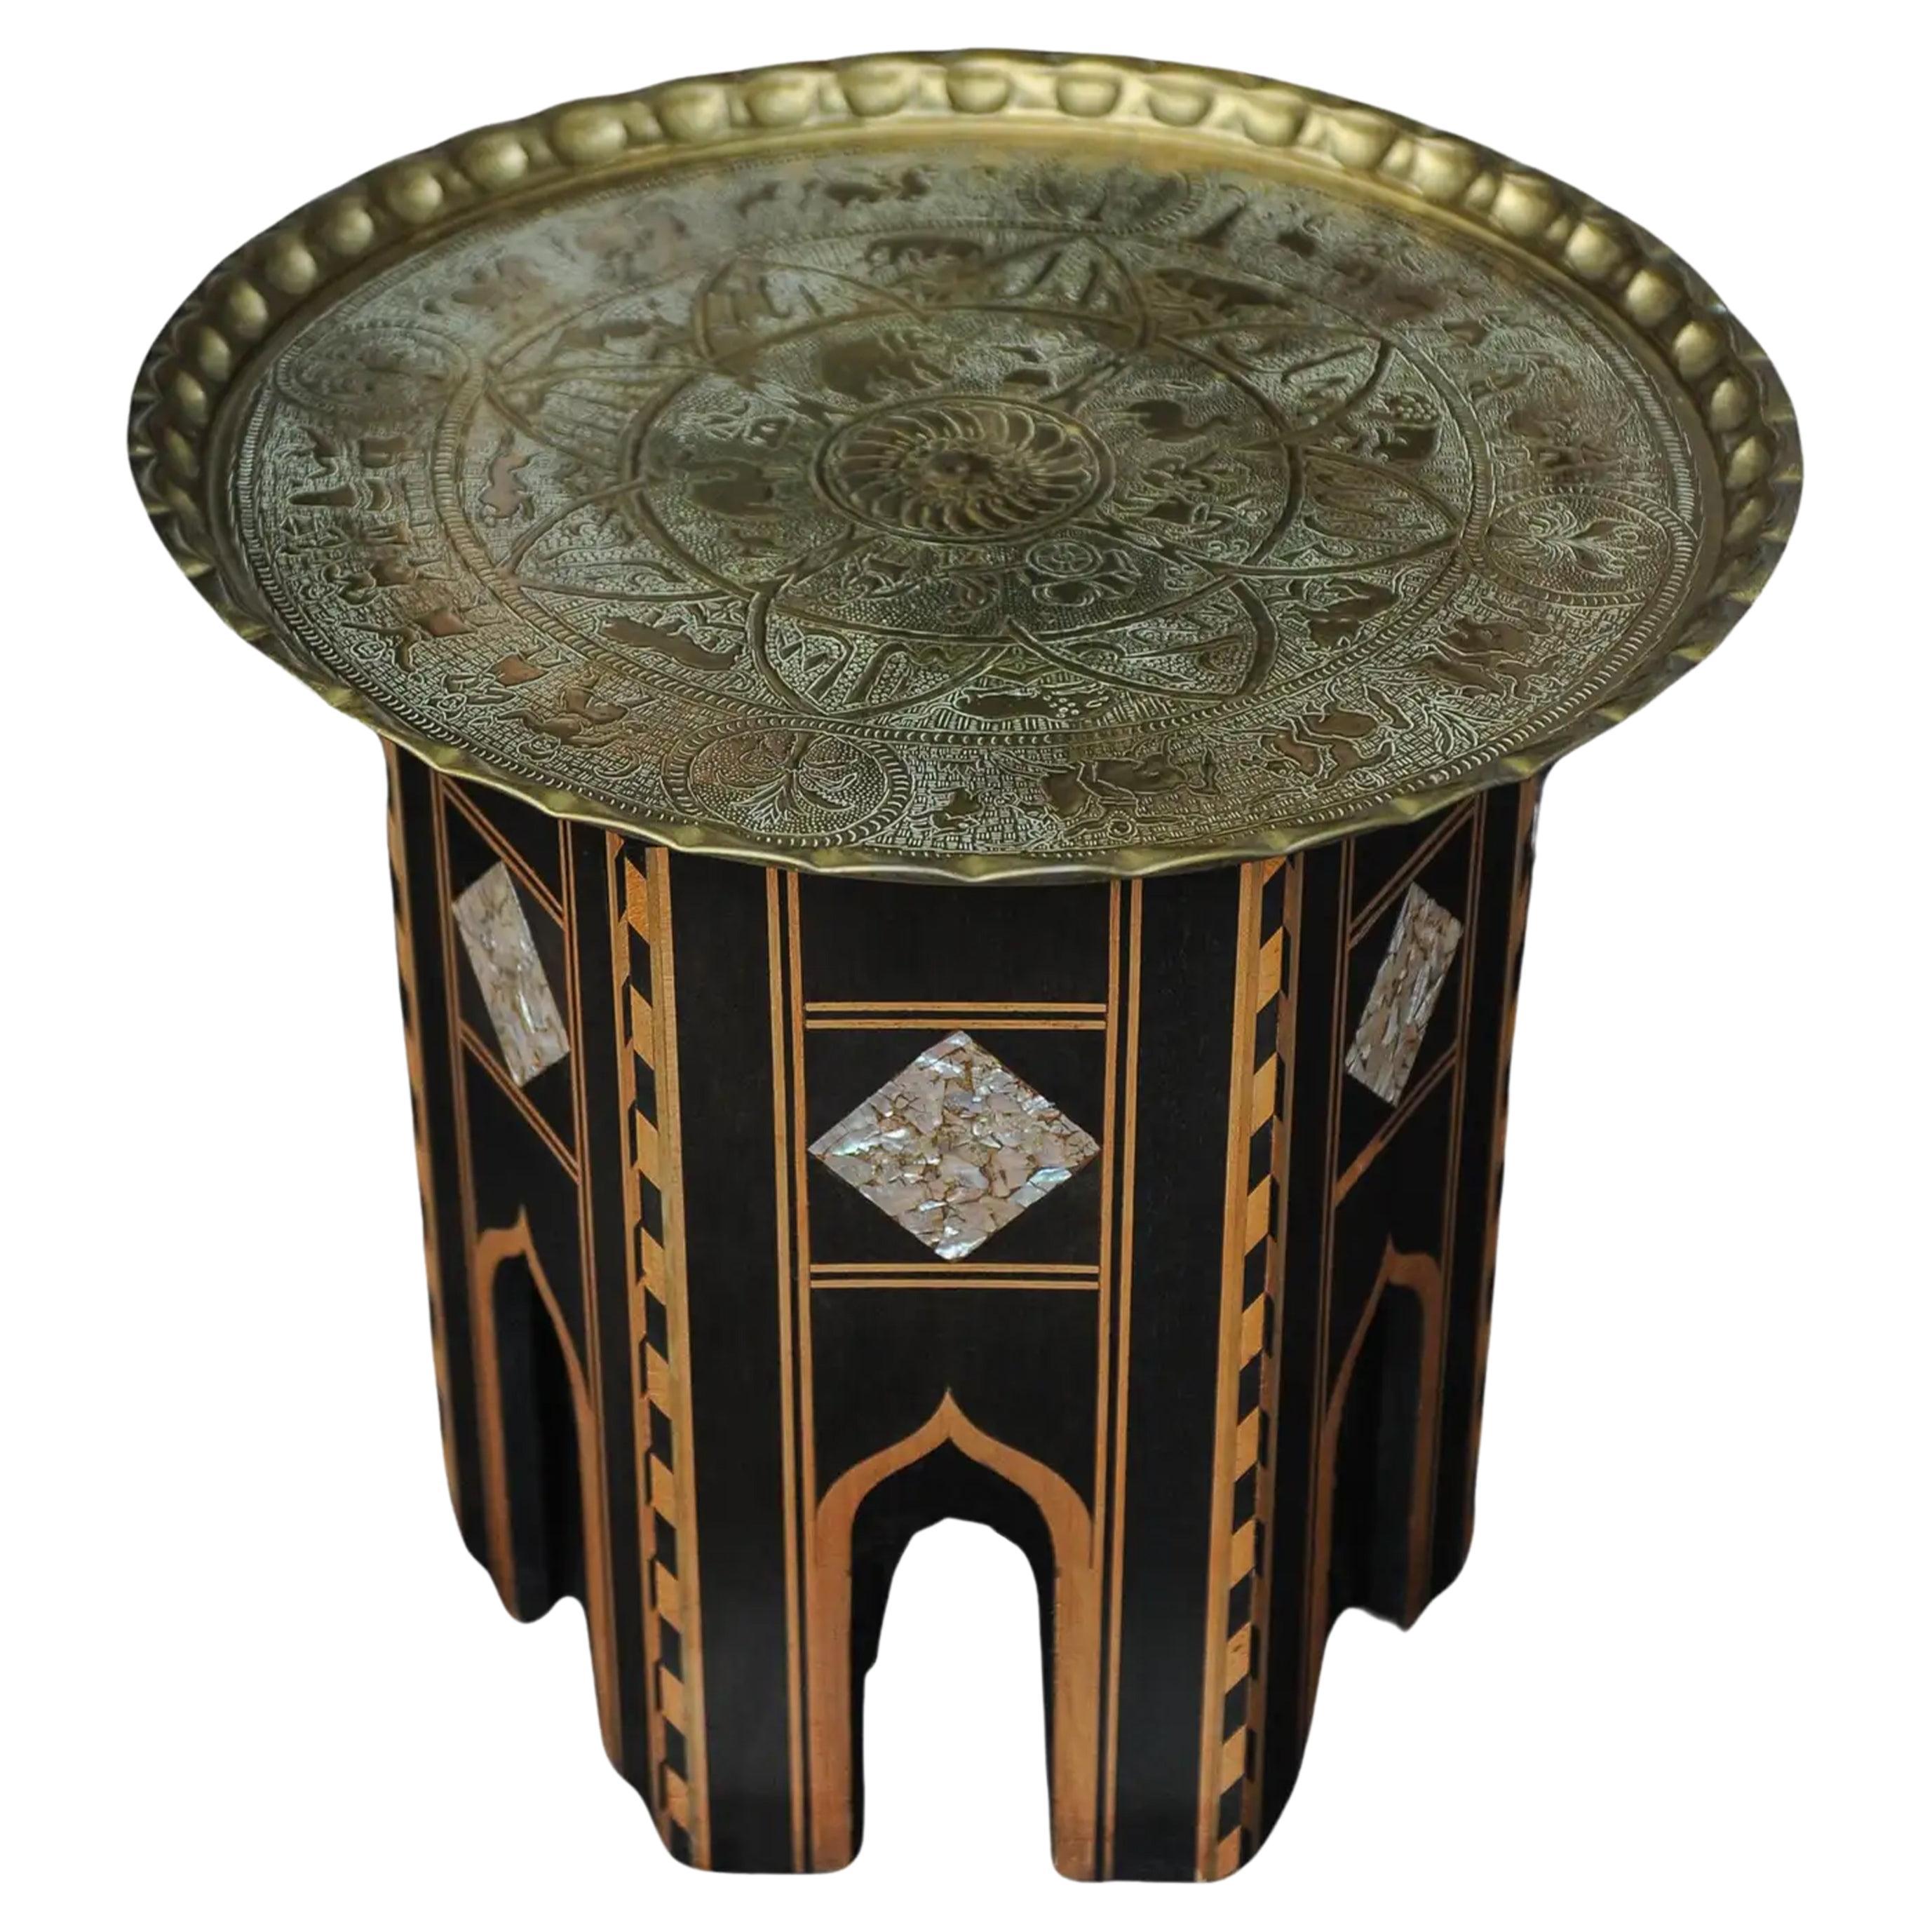 A Middle Eastern1540 Ebonised Tea Table With Removable Brass Decorative Tray  For Sale